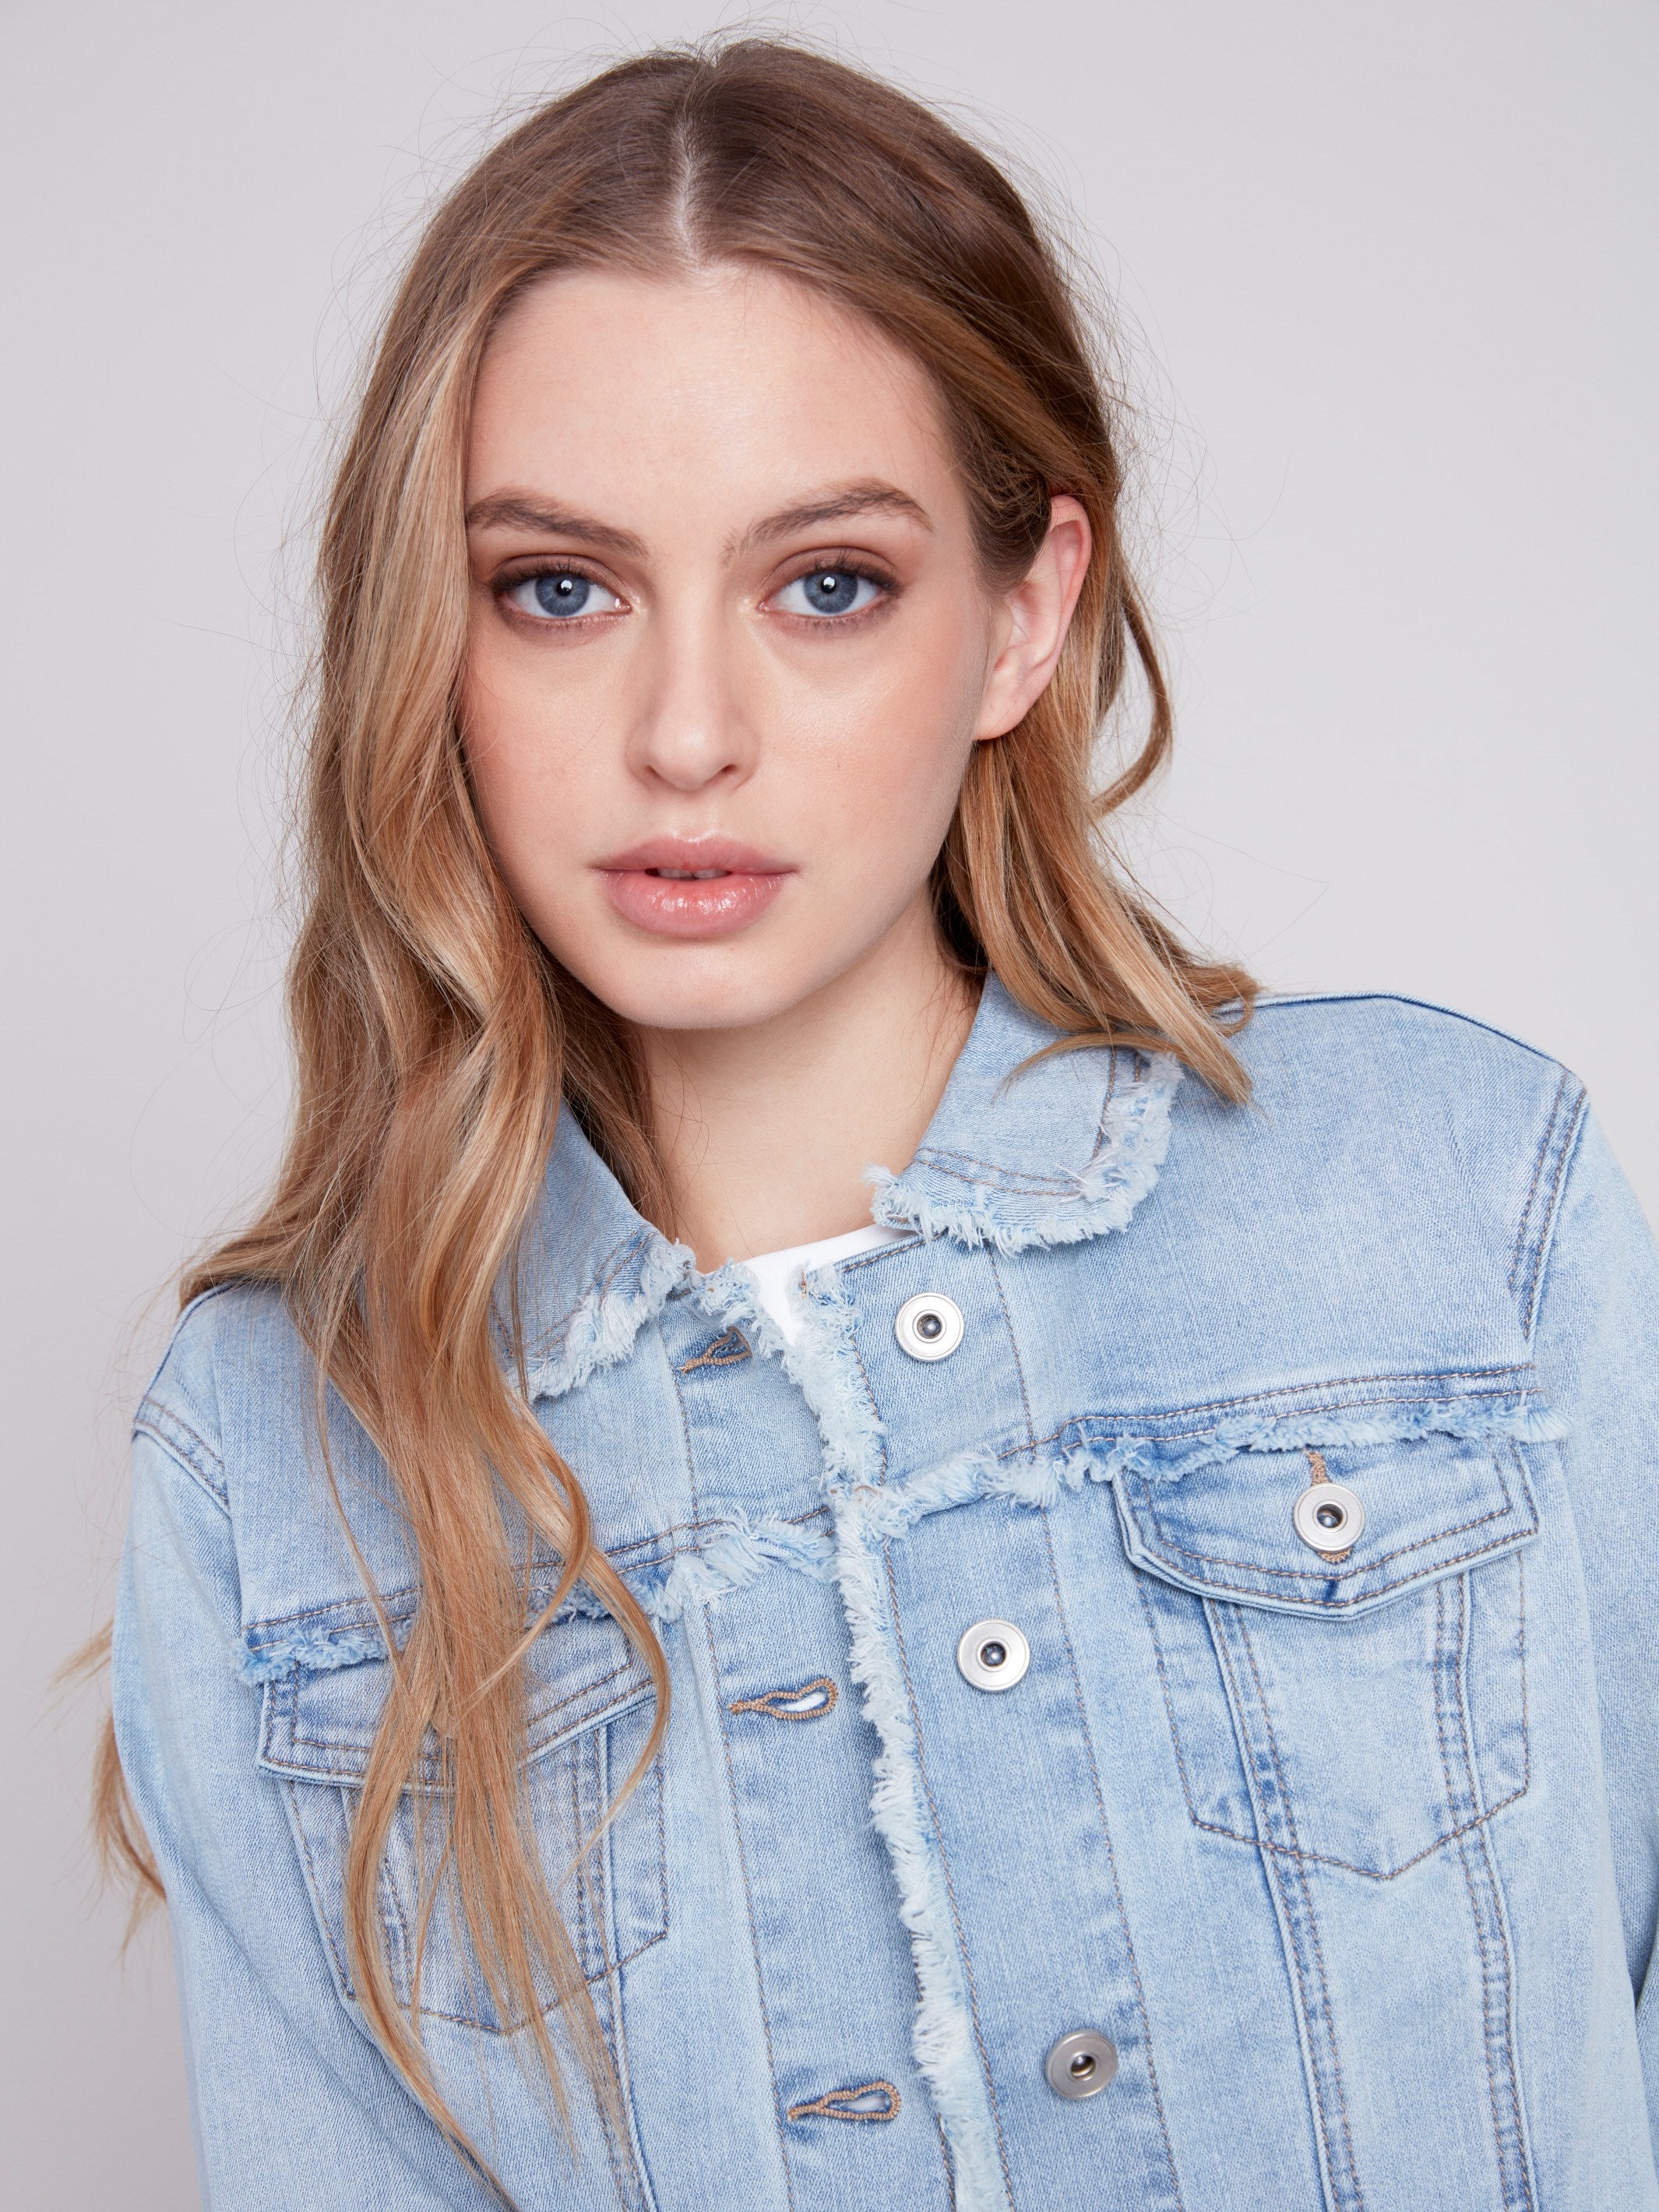 Jean Jacket with Frayed Edges - Bleach Blue - Charlie B Collection Canada - Image 4